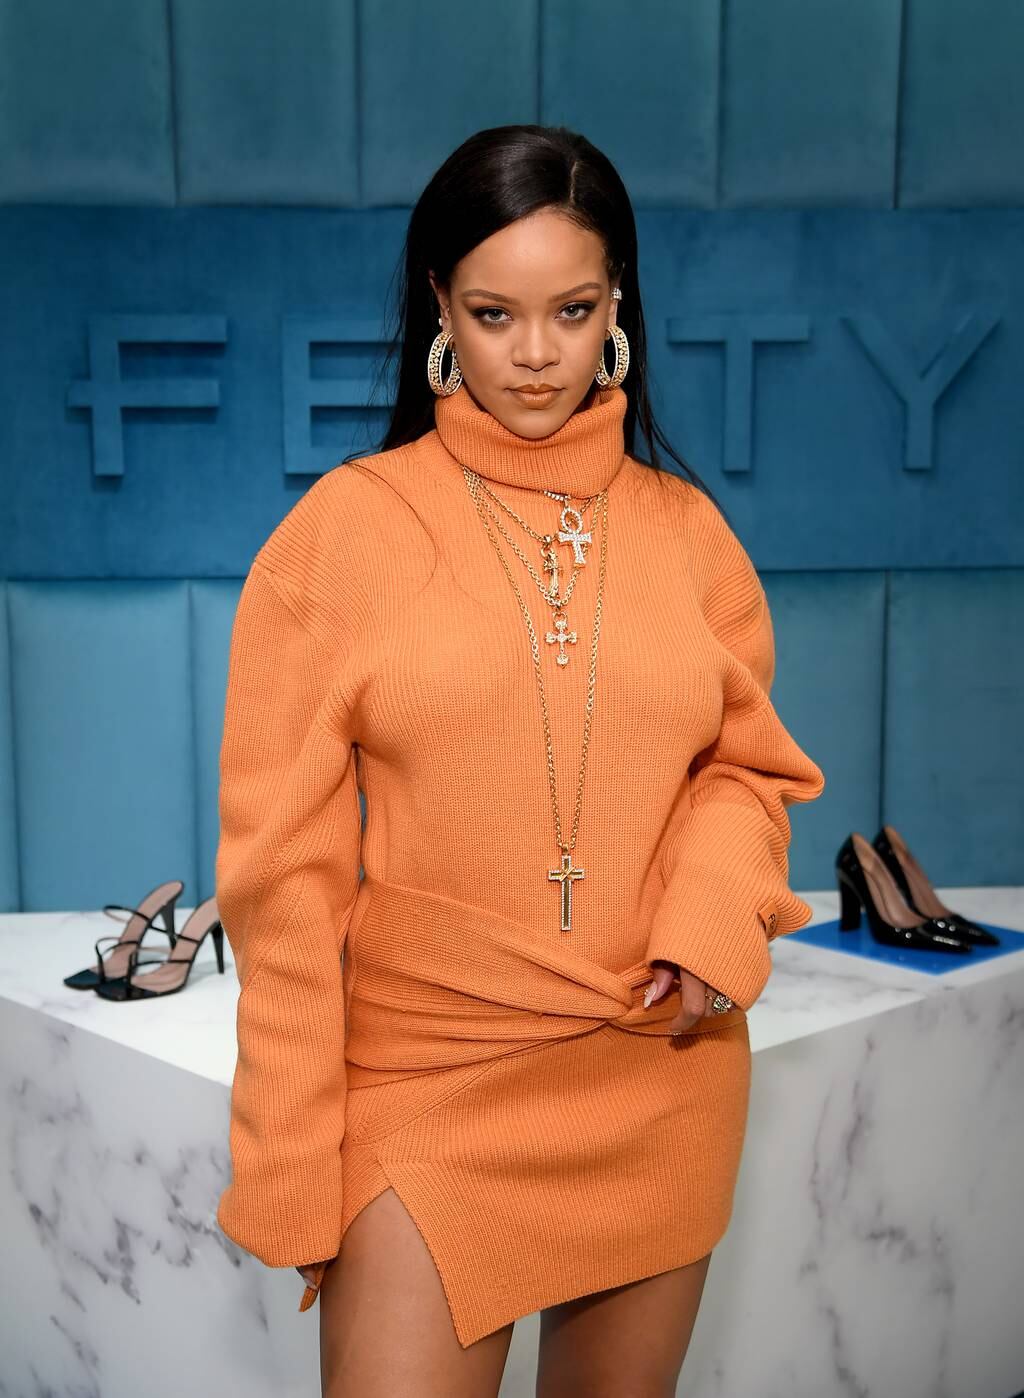 Rihanna at the launch of FENTY at Bergdorf Goodman in New York City in February 2020. Getty Images.